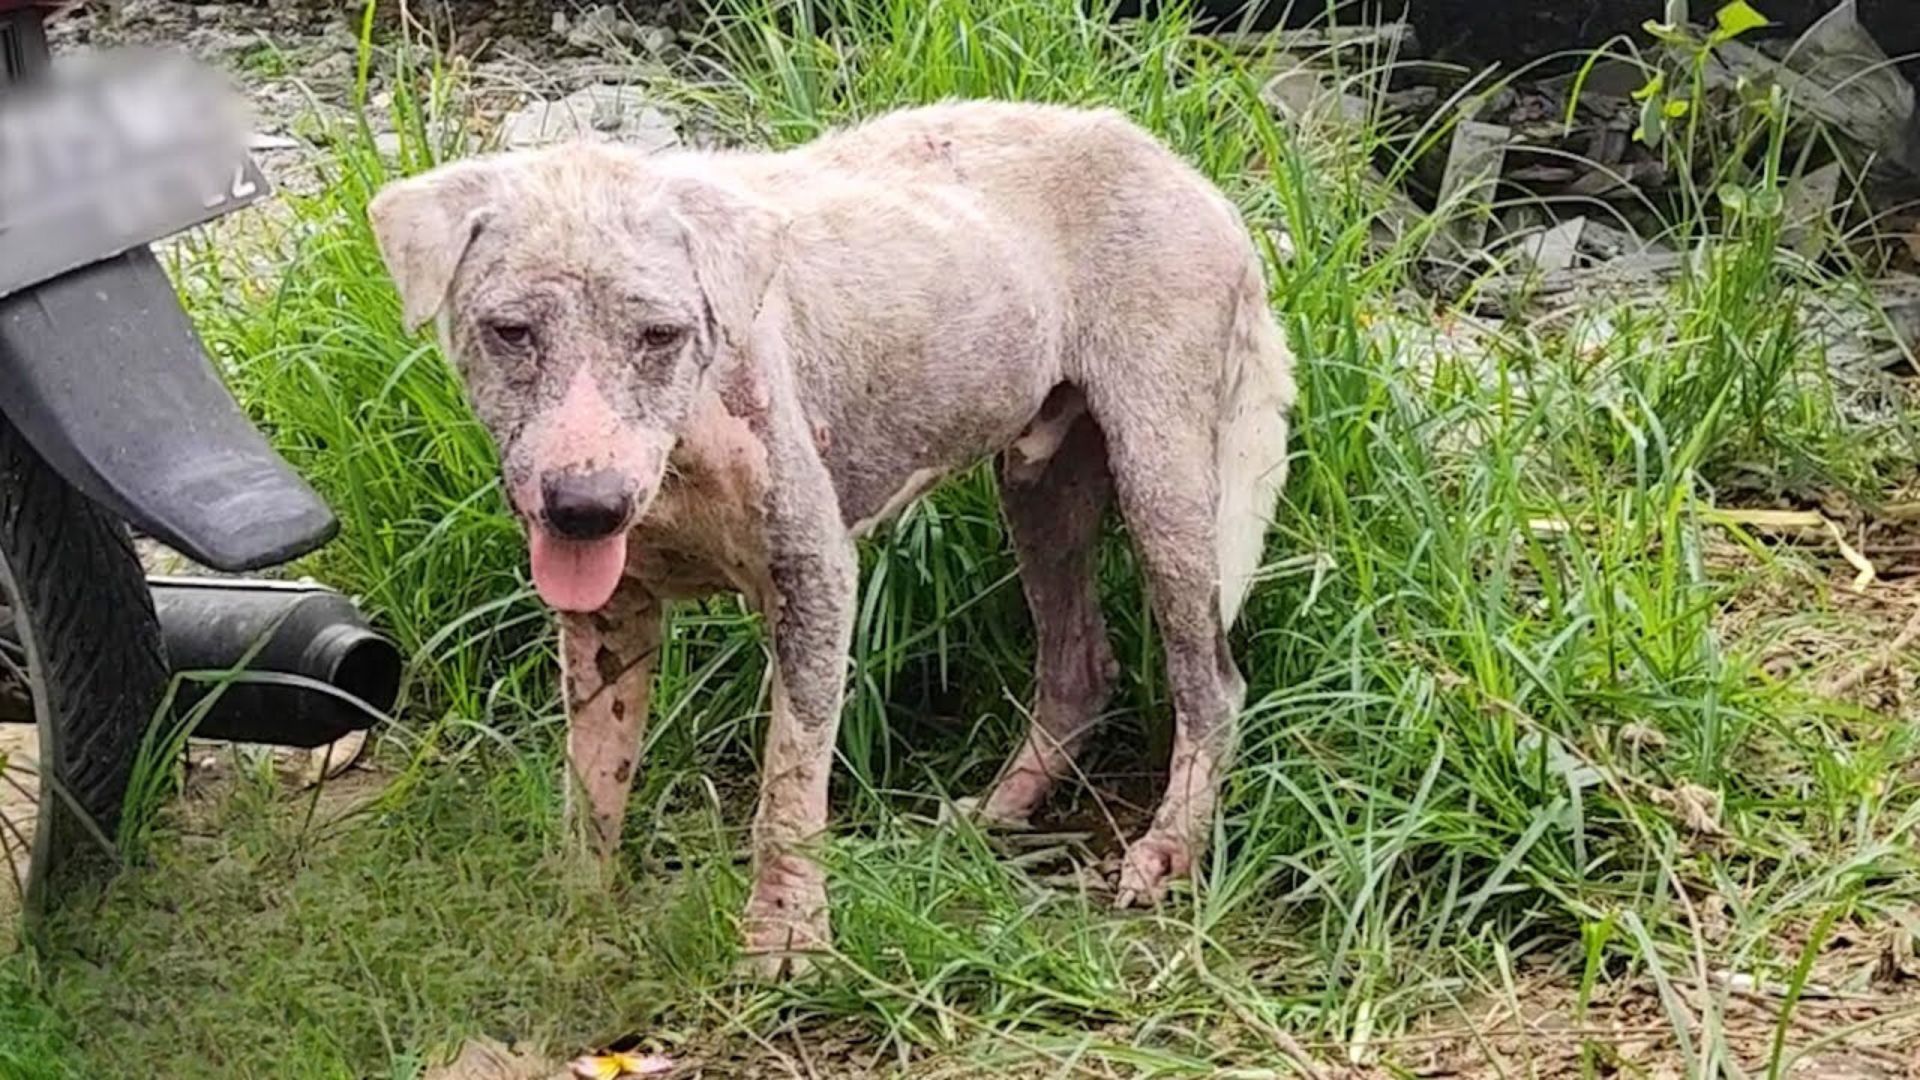 Witness This Sweet Dog’s Amazing Makeover After Being Saved By Rescuers From A Gas Station